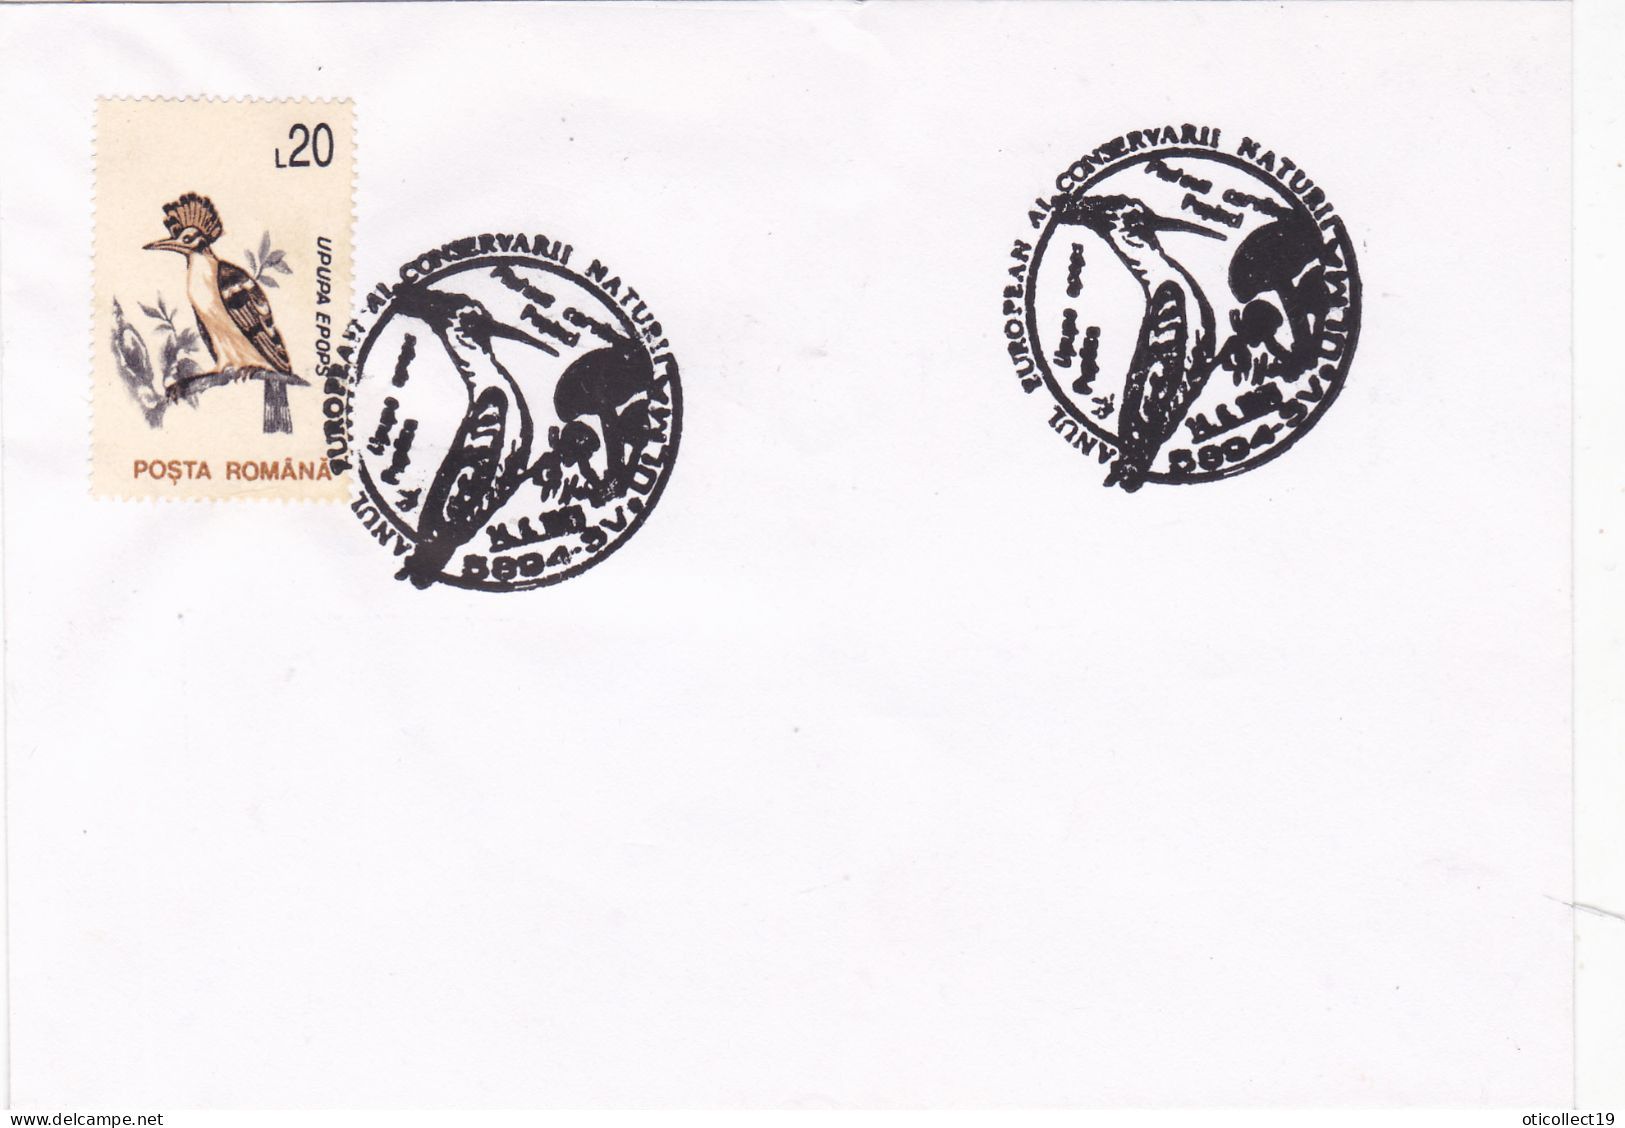 HOOPOE, SPECIAL  PMK ON COVERS WITH STAMPS 1995 RARE!, ROMANIA - Picchio & Uccelli Scalatori